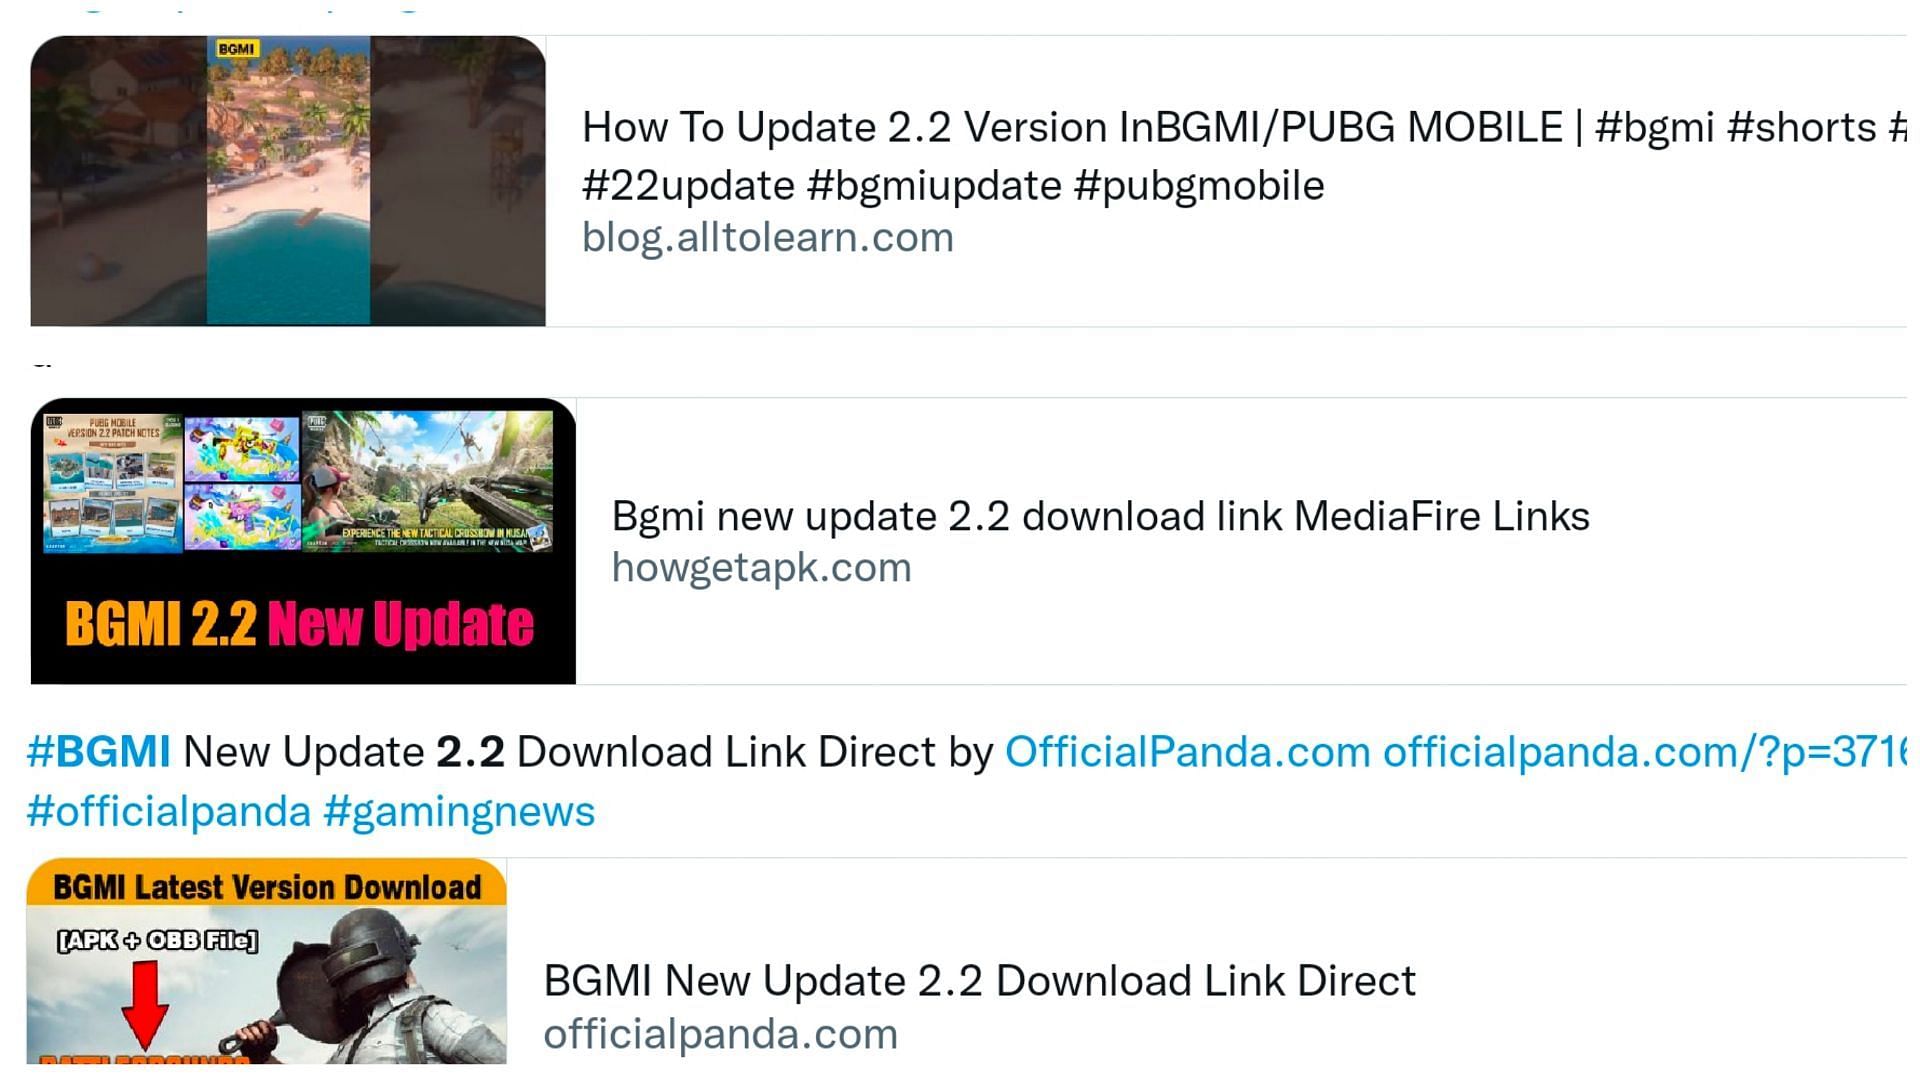 Fake download links for Battlegrounds Mobile India 2.2 update have made their way to the internet (Image via Twitter)